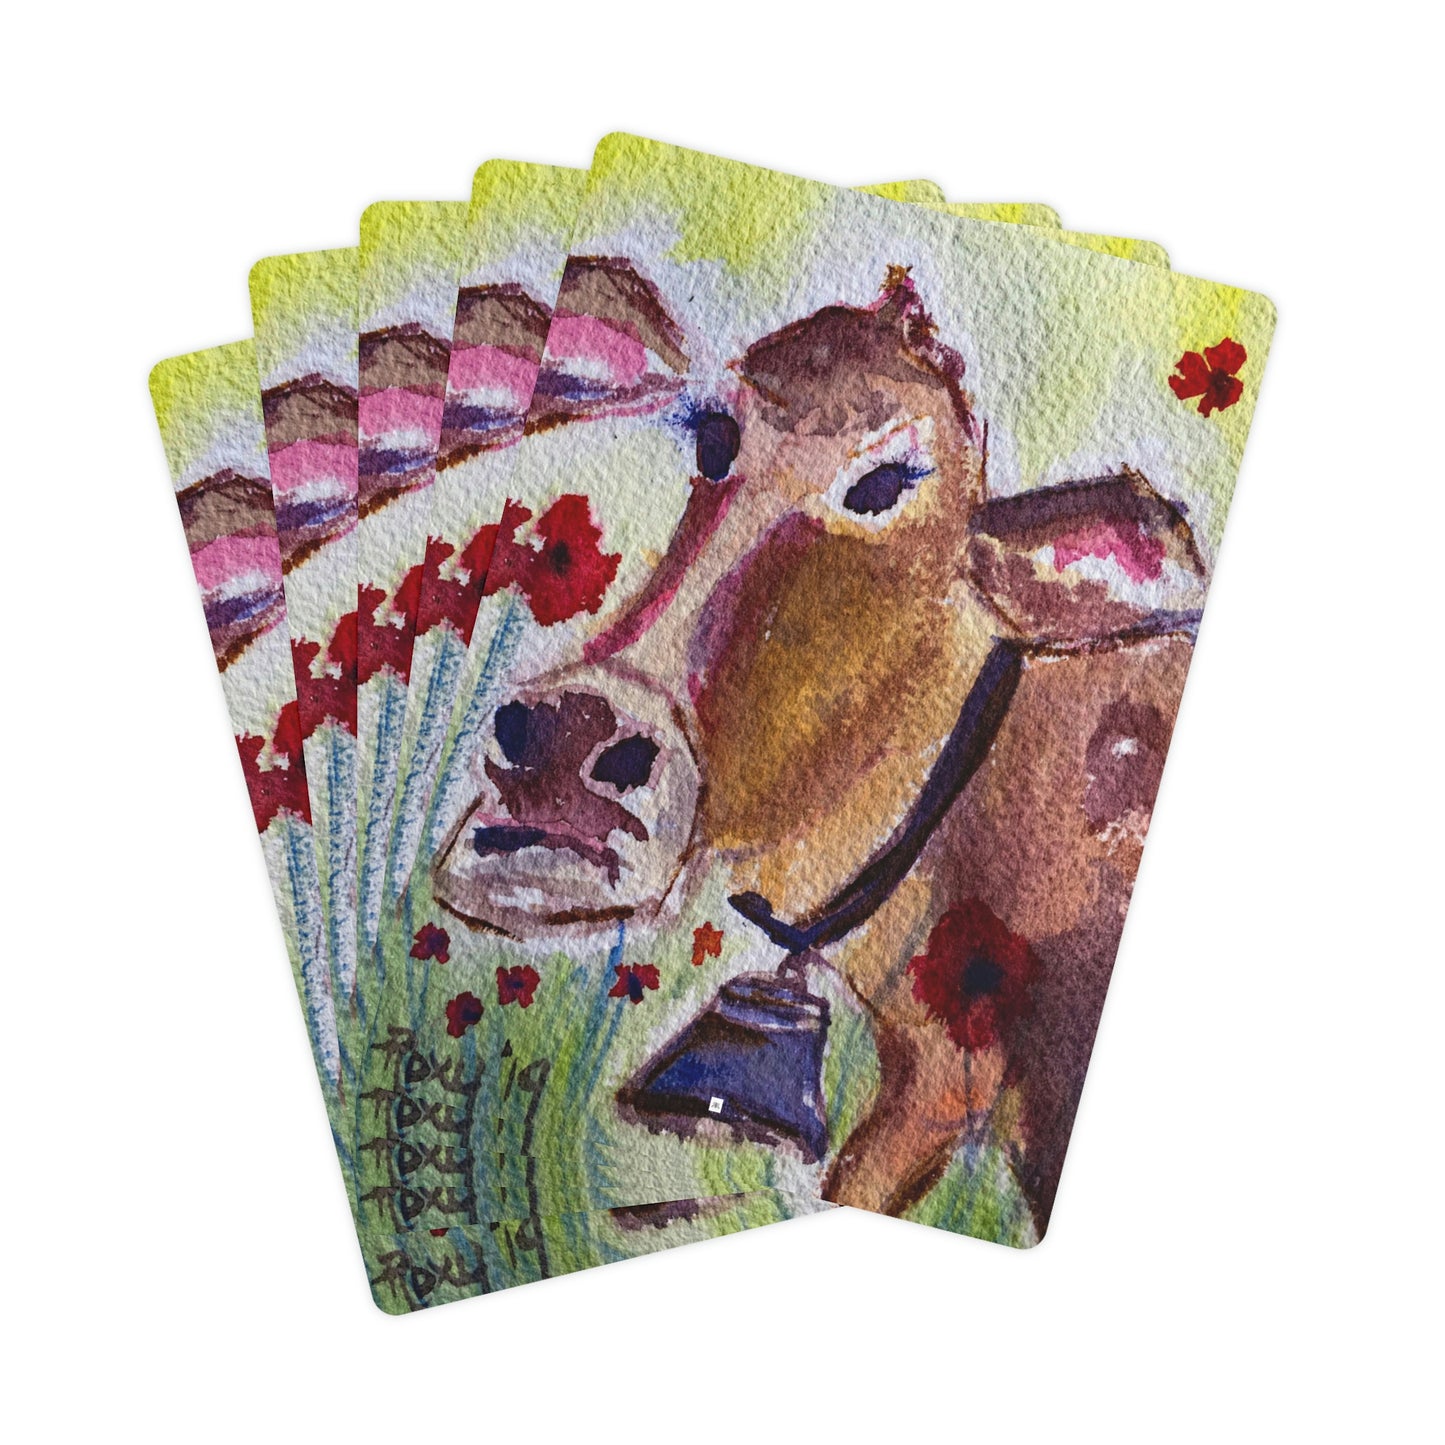 Belle- Whimsical Cow- Poker Cards/Playing Cards